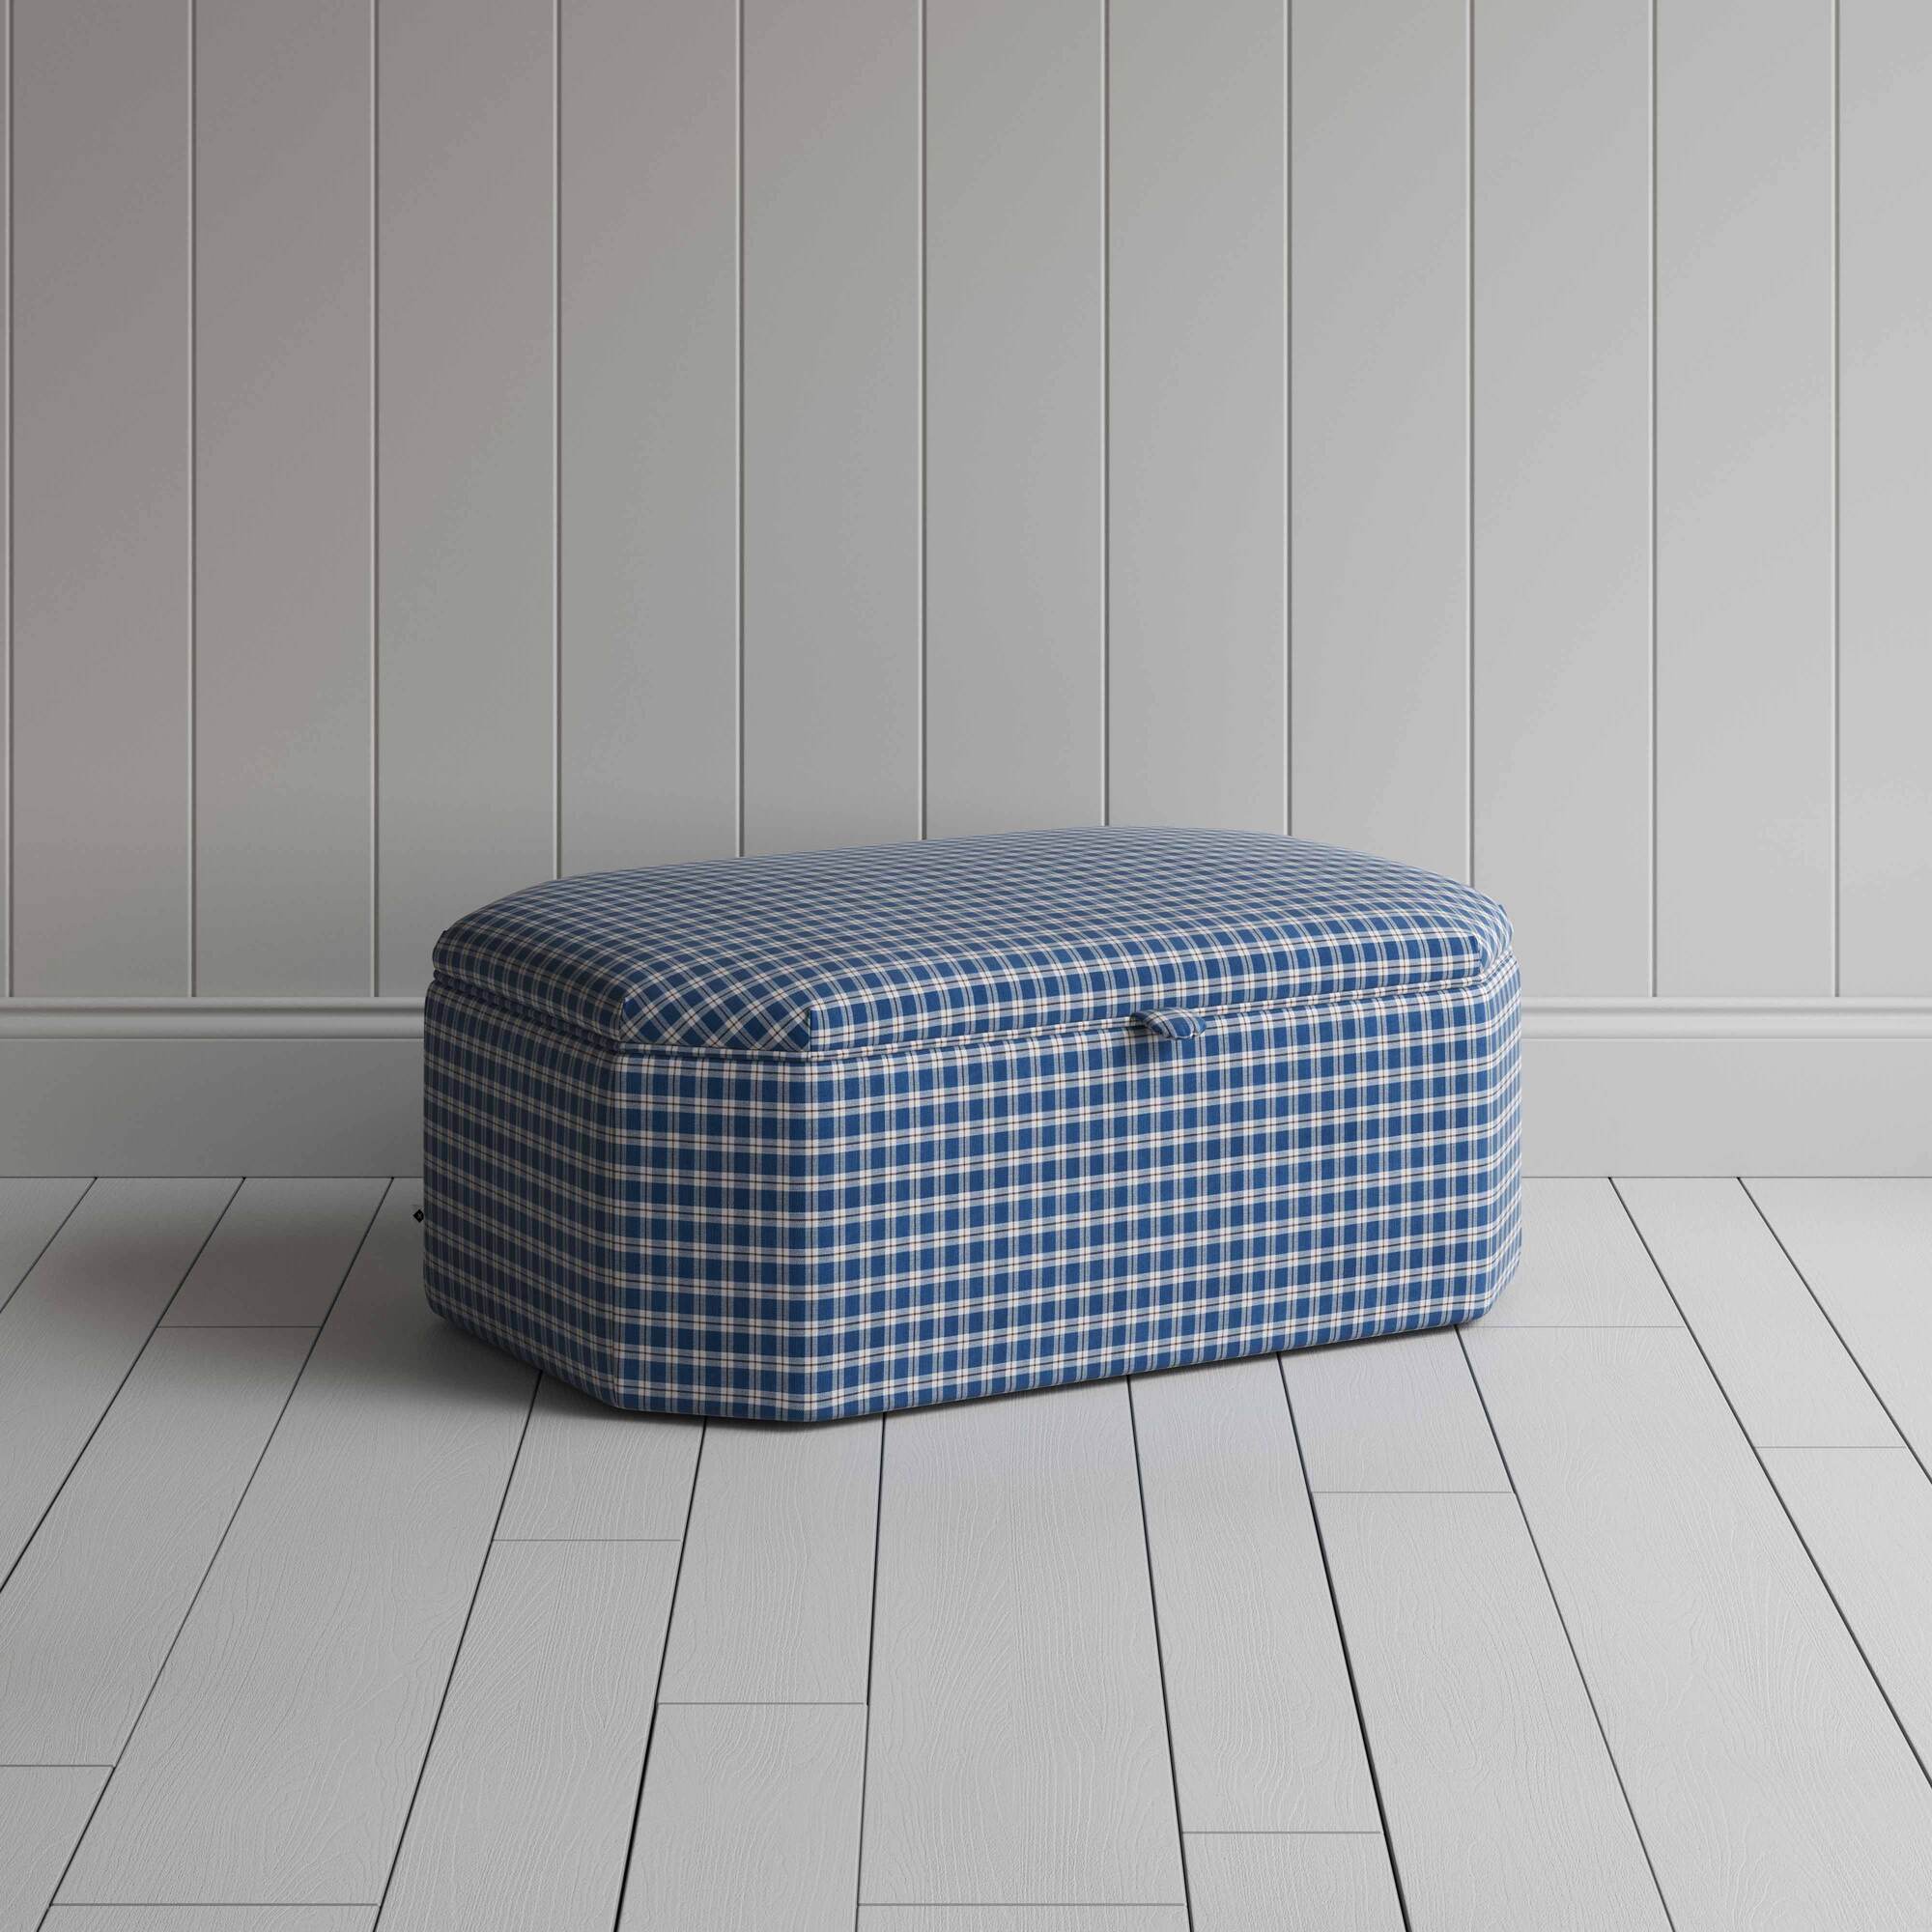  Hither Hexagonal Storage Ottoman in Well Plaid Cotton, Blue Brown 